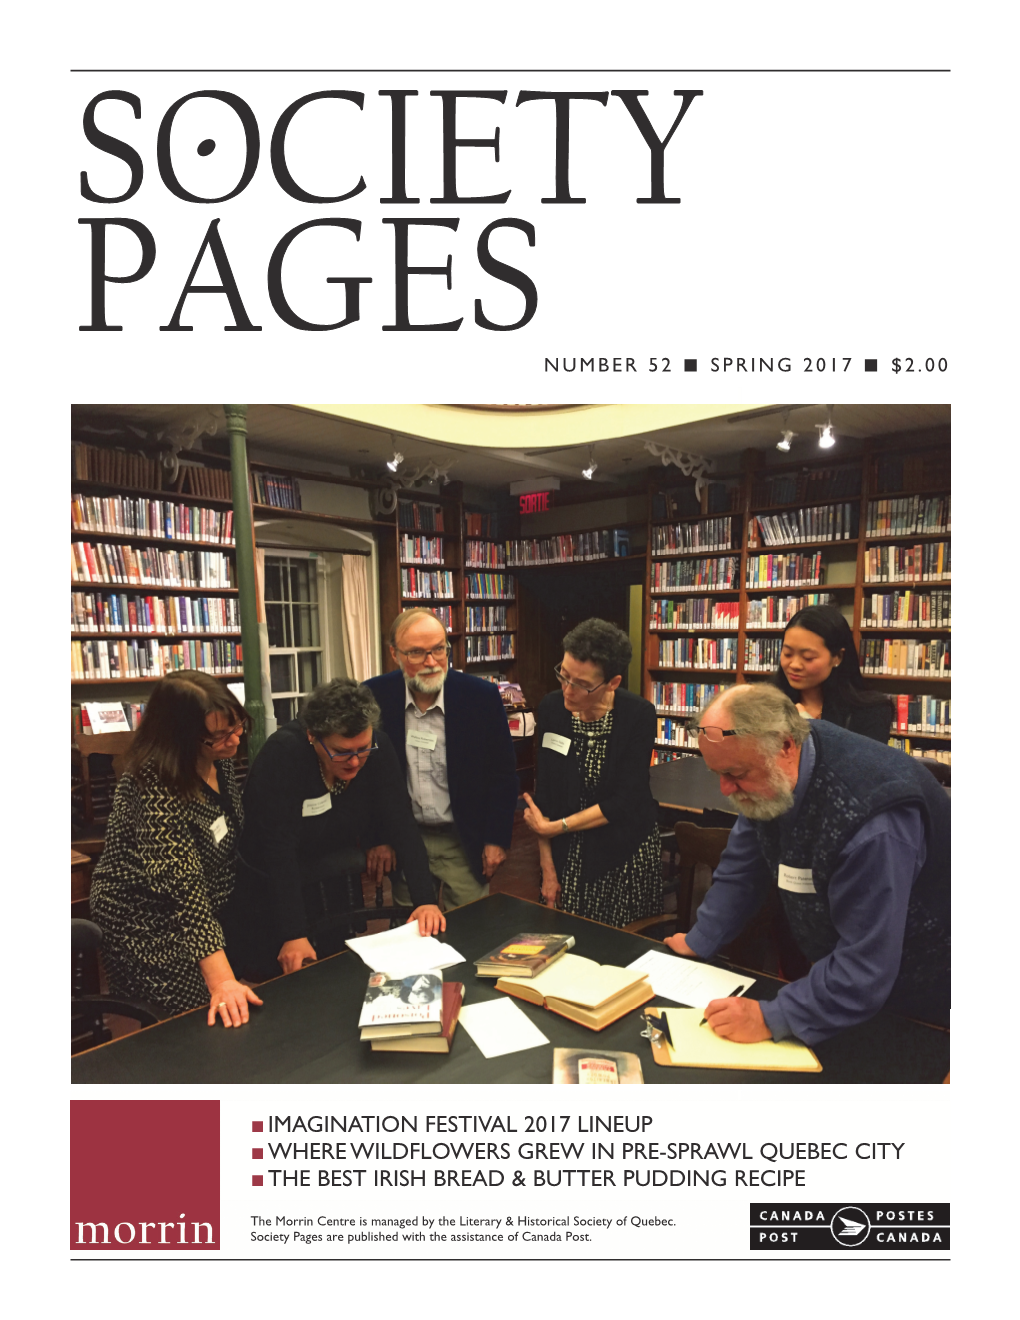 Society Pages Are Published with the Assistance of Canada Post